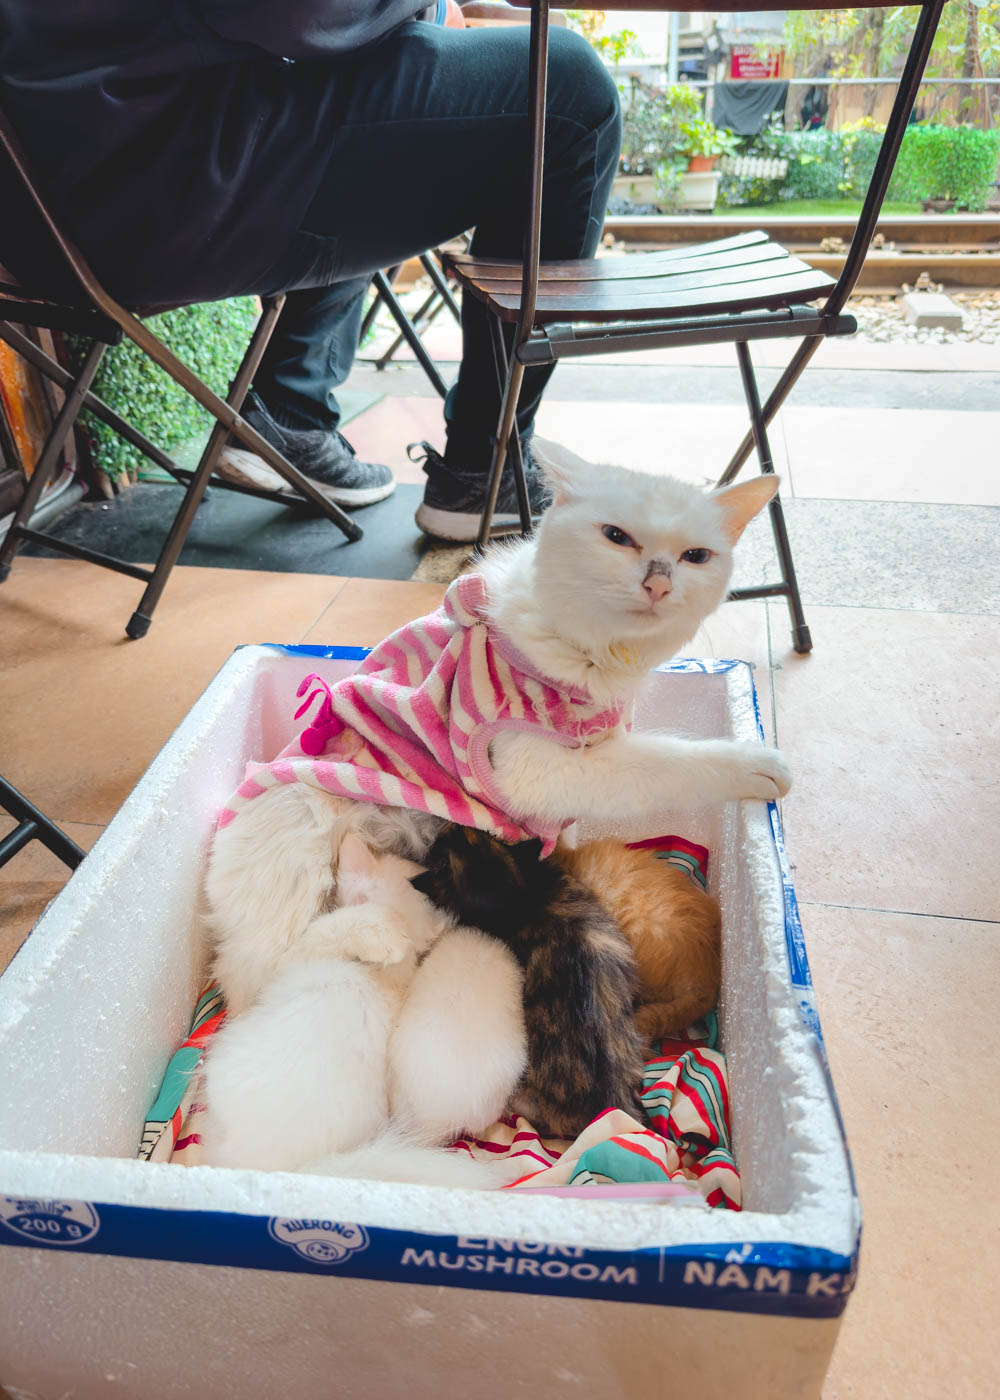 A polystyrene box full of kittens feeding from their mother cat in a cafe in Hanoi.